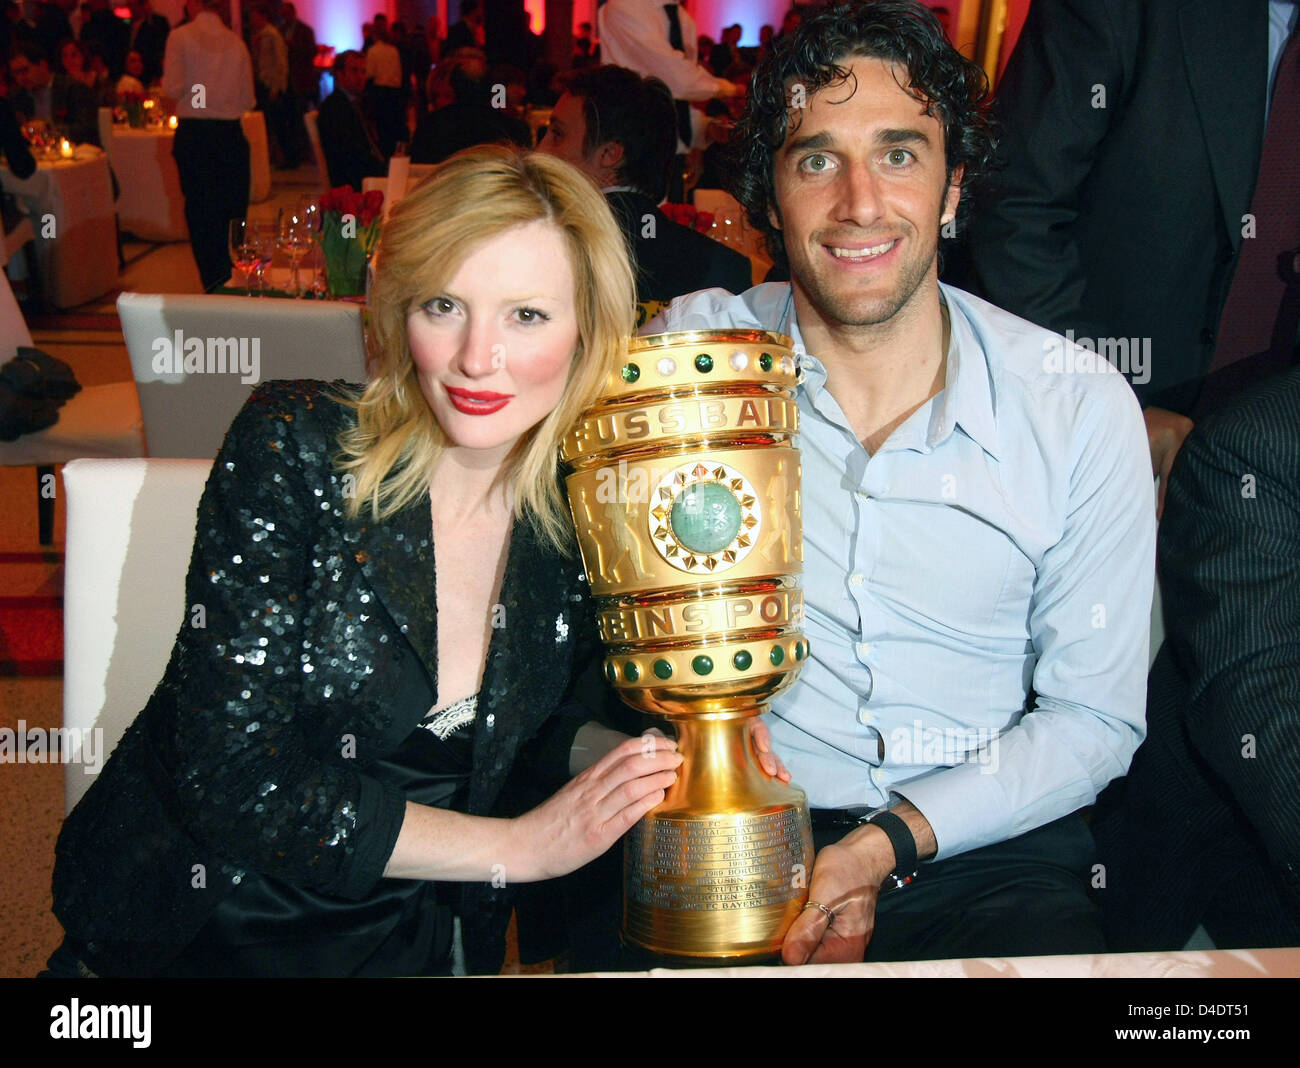 Luca Toni of Bayern Munic poses with his girlfriend Marta Cecchetto and the DFB-Trophy during the Bayern Munich champions party after the DFB Cup Final match between Borussia Dortmund and FC Bayern Munich at the Deutsche Telekom Represantive House Berlin, Germany, in the early morning of 20 April 2008. Photo: Alexander Hassenstein Stock Photo